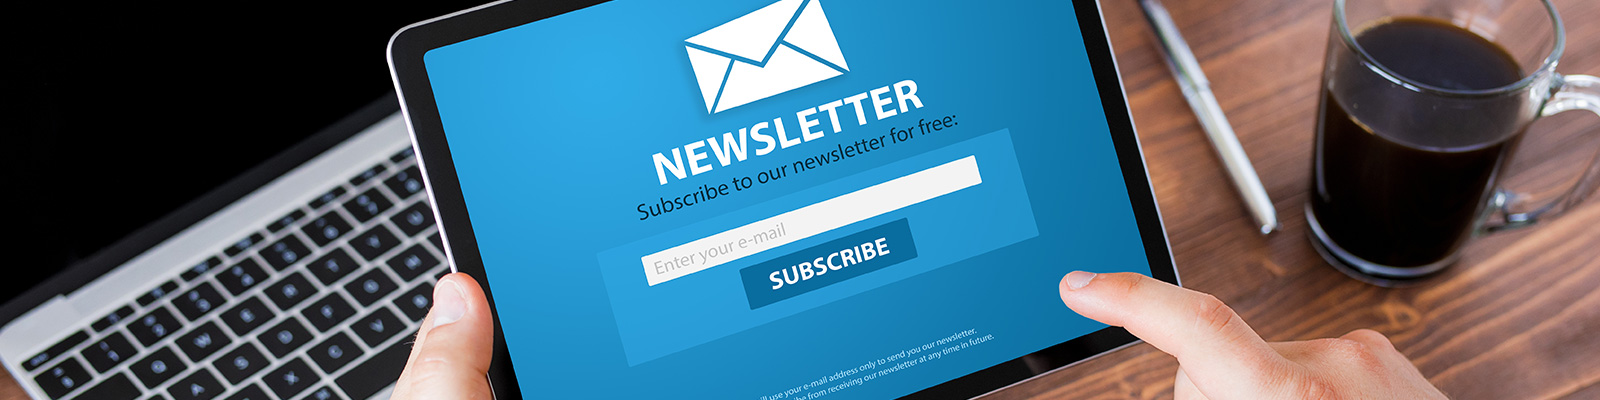 Newsletter subscribe button shown on tablet screen